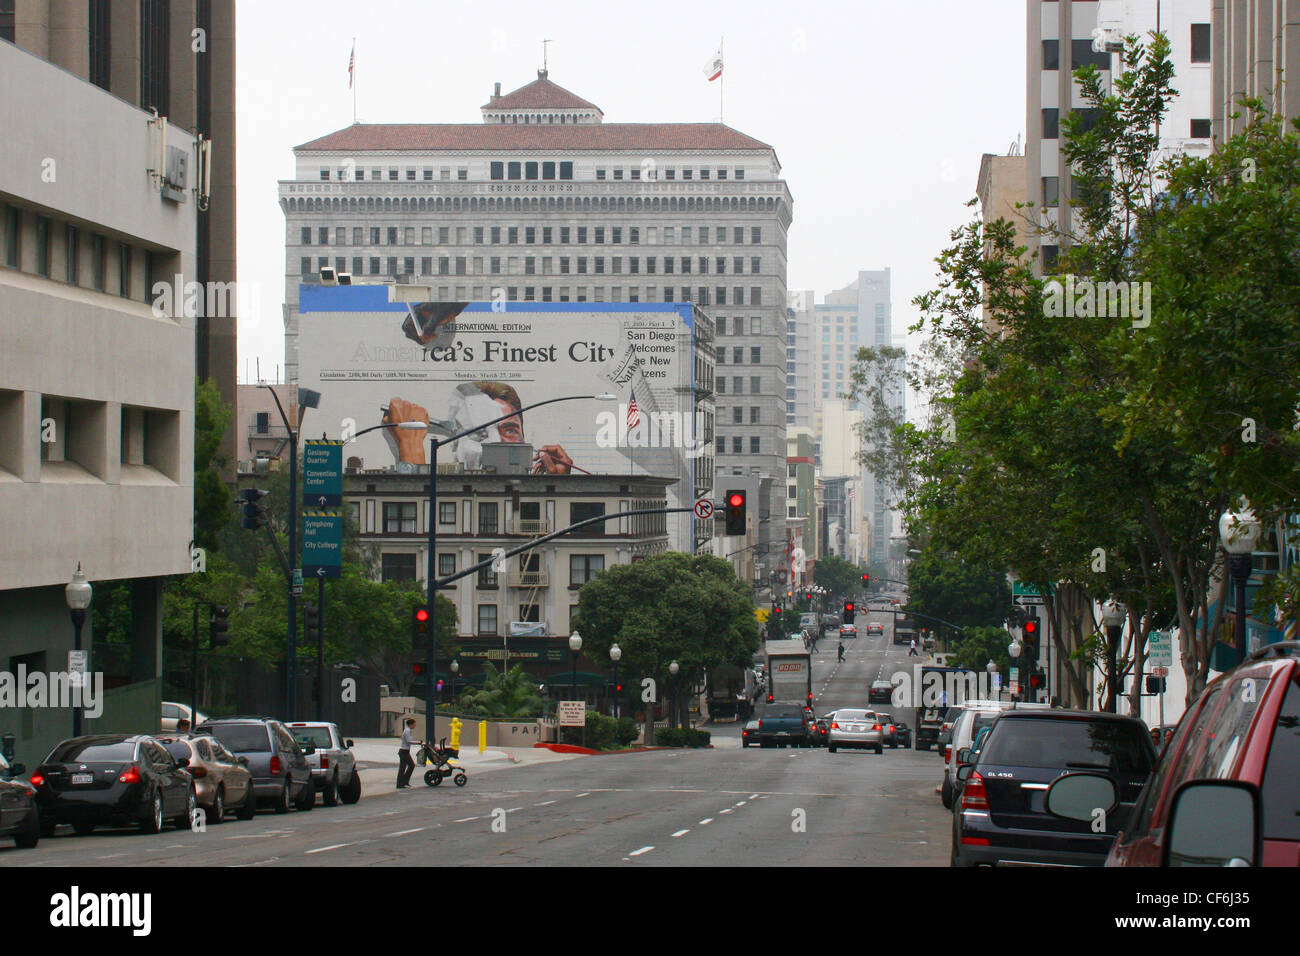 Images of San Diego, California.  Busy street, America's finest city mural on an office bui Stock Photo